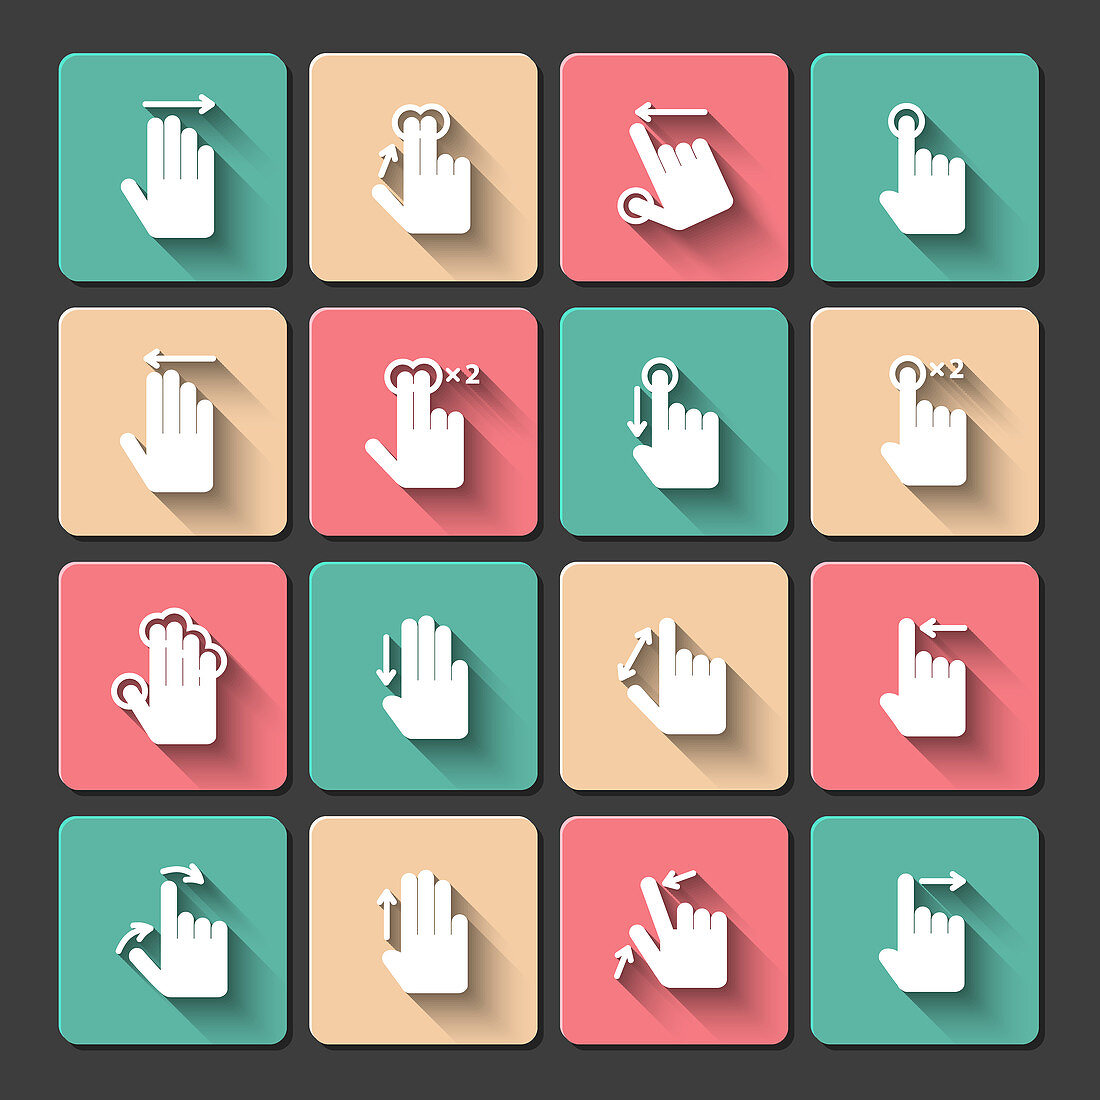 Touch screen hand gestures, illustration